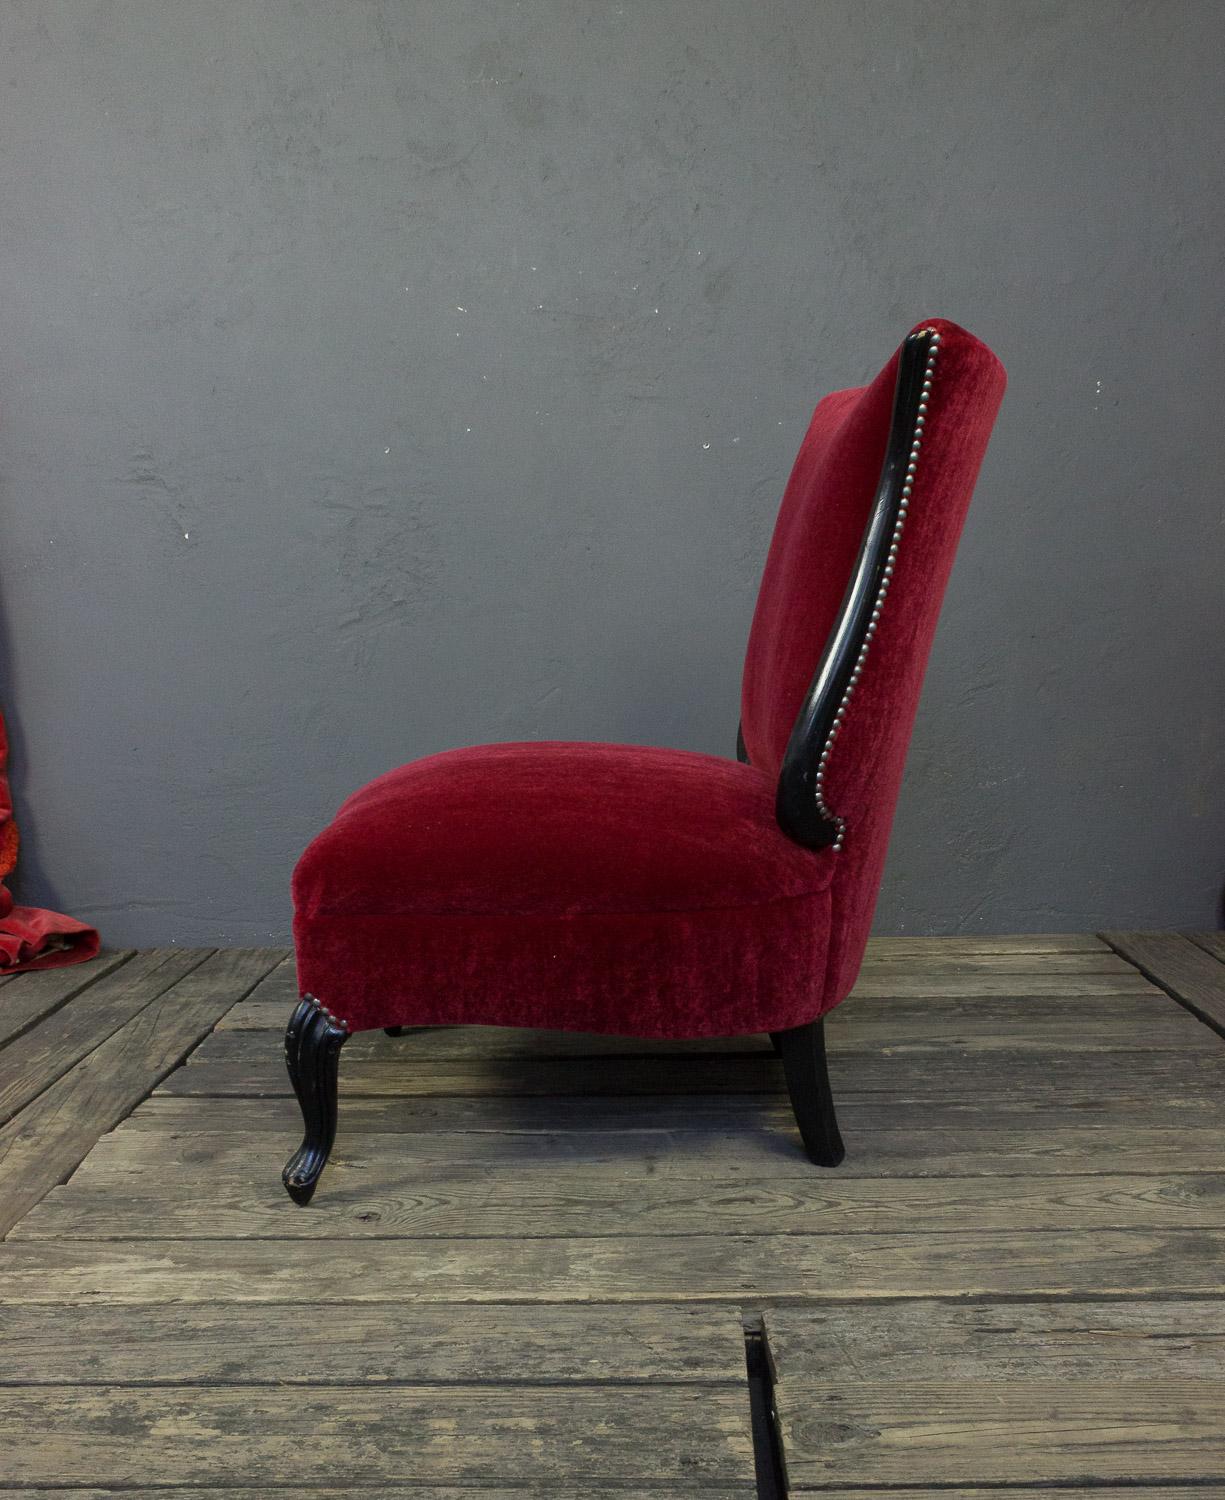 American Mid-Century Scrolled Leg Slipper Chair For Sale 4